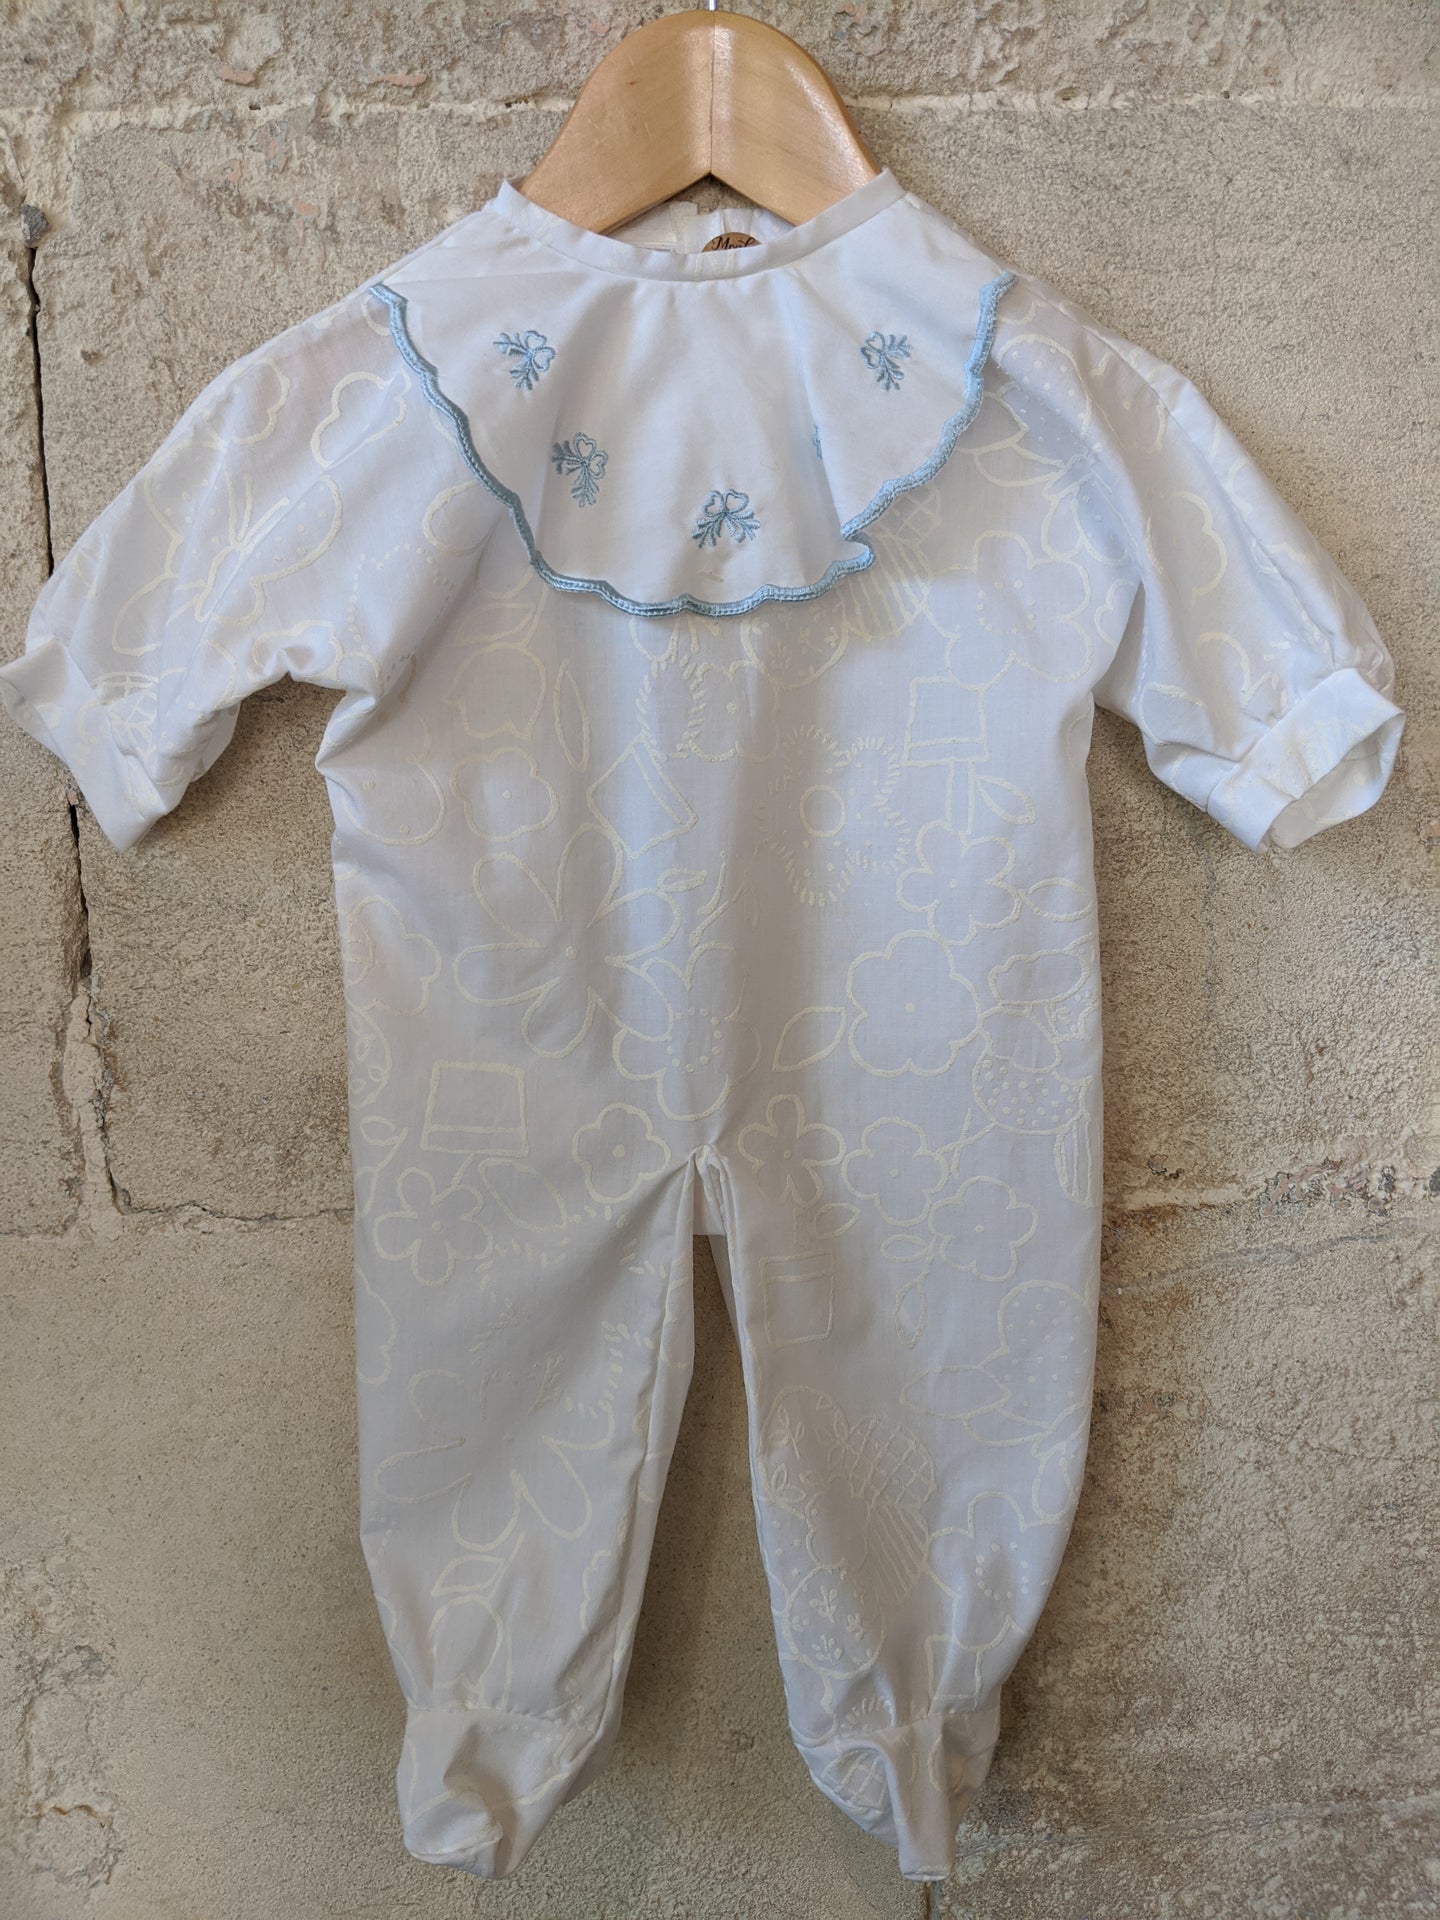 Antique Handmade White Floral Playsuit - 3 Months